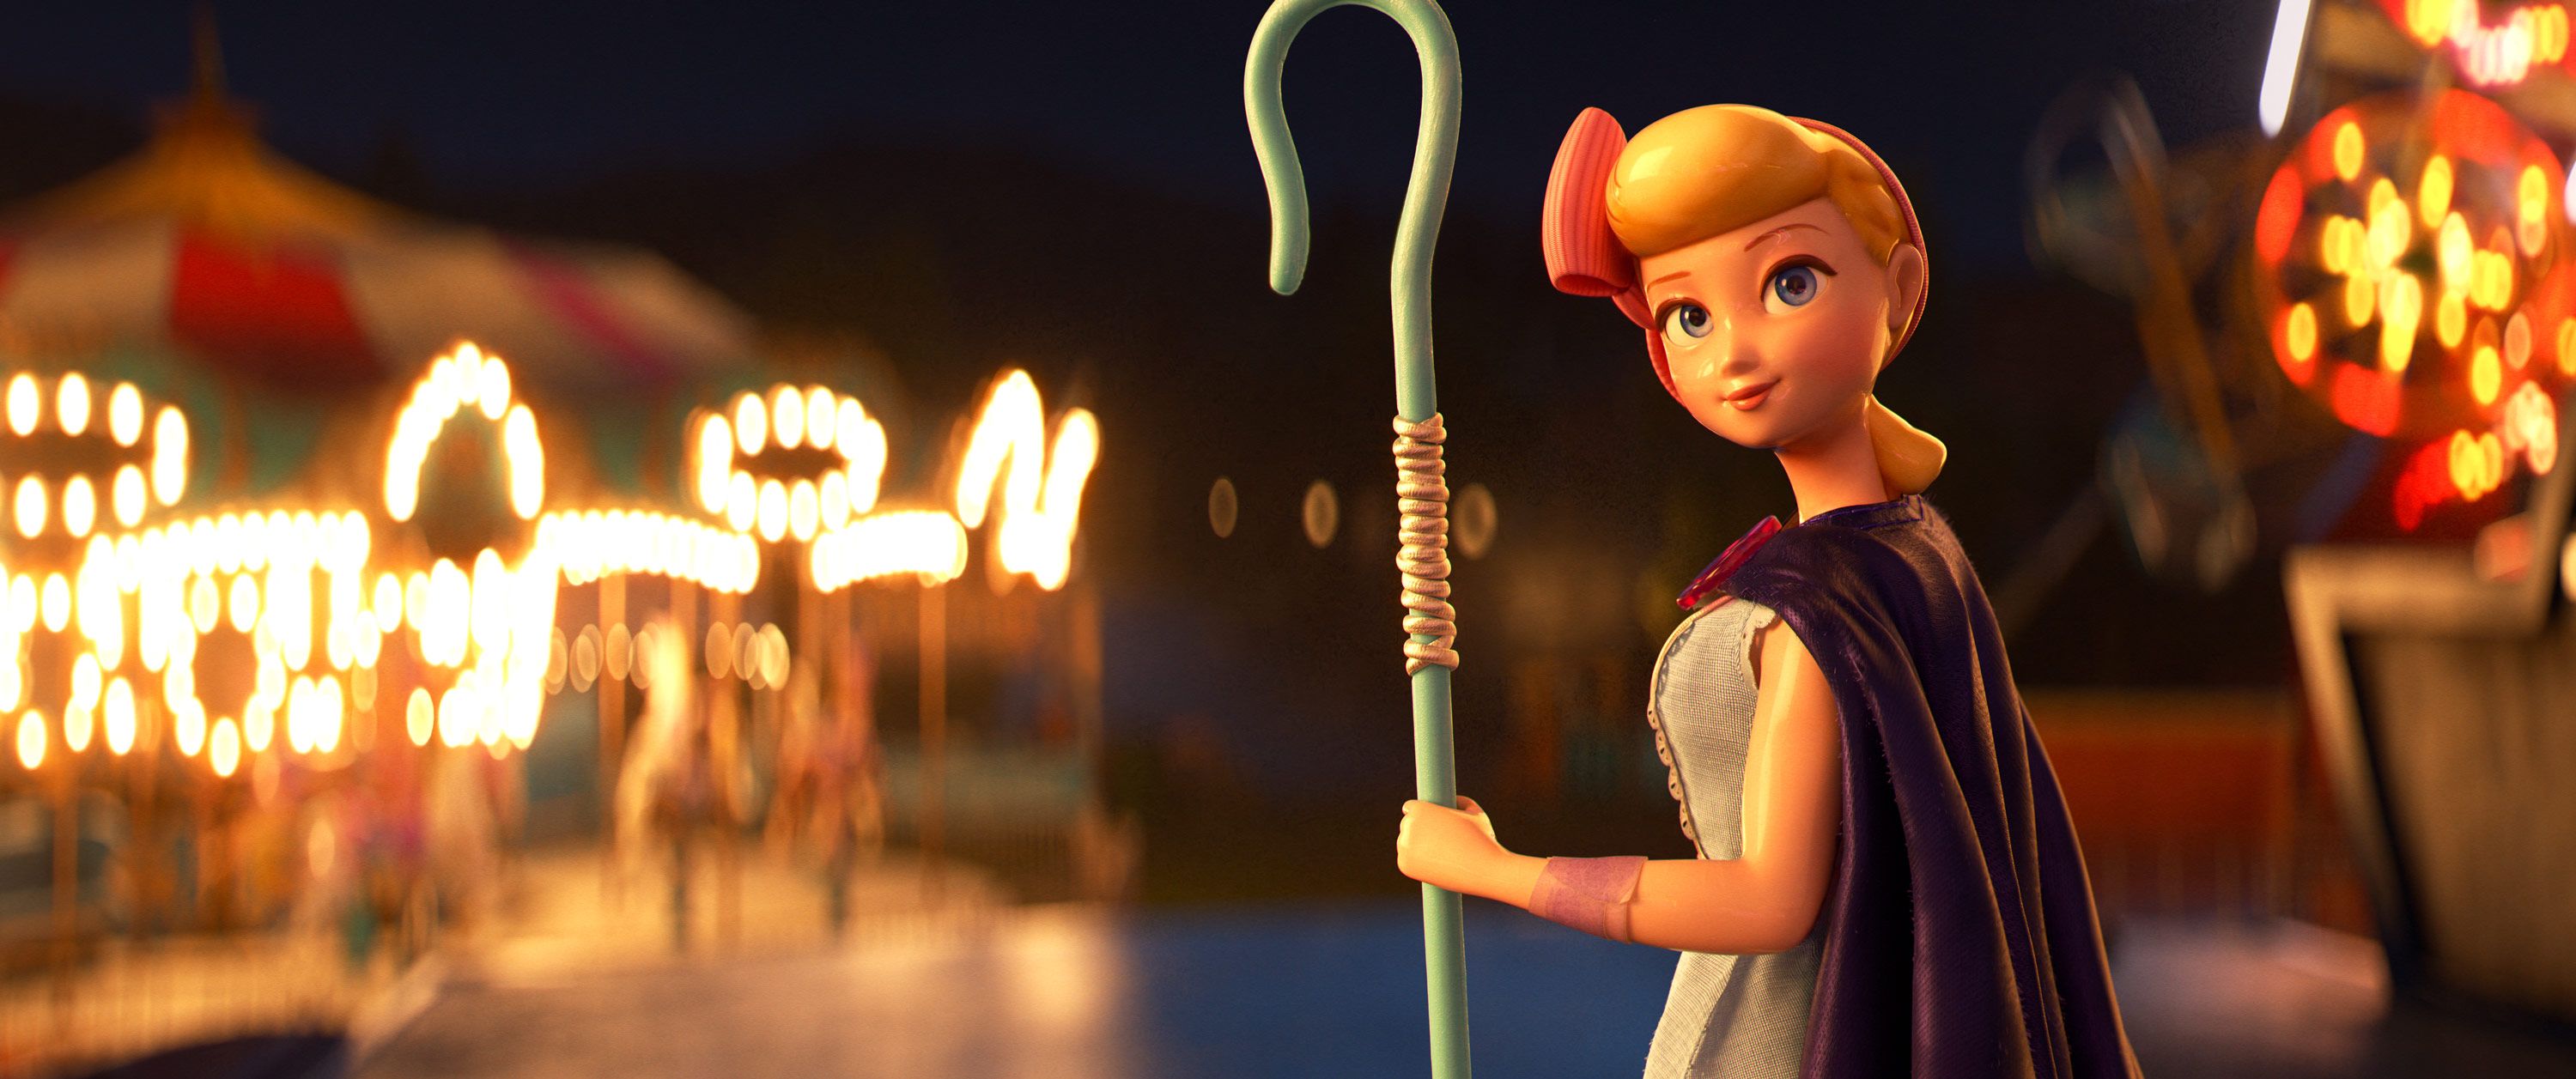 download little bo peep toy story 4